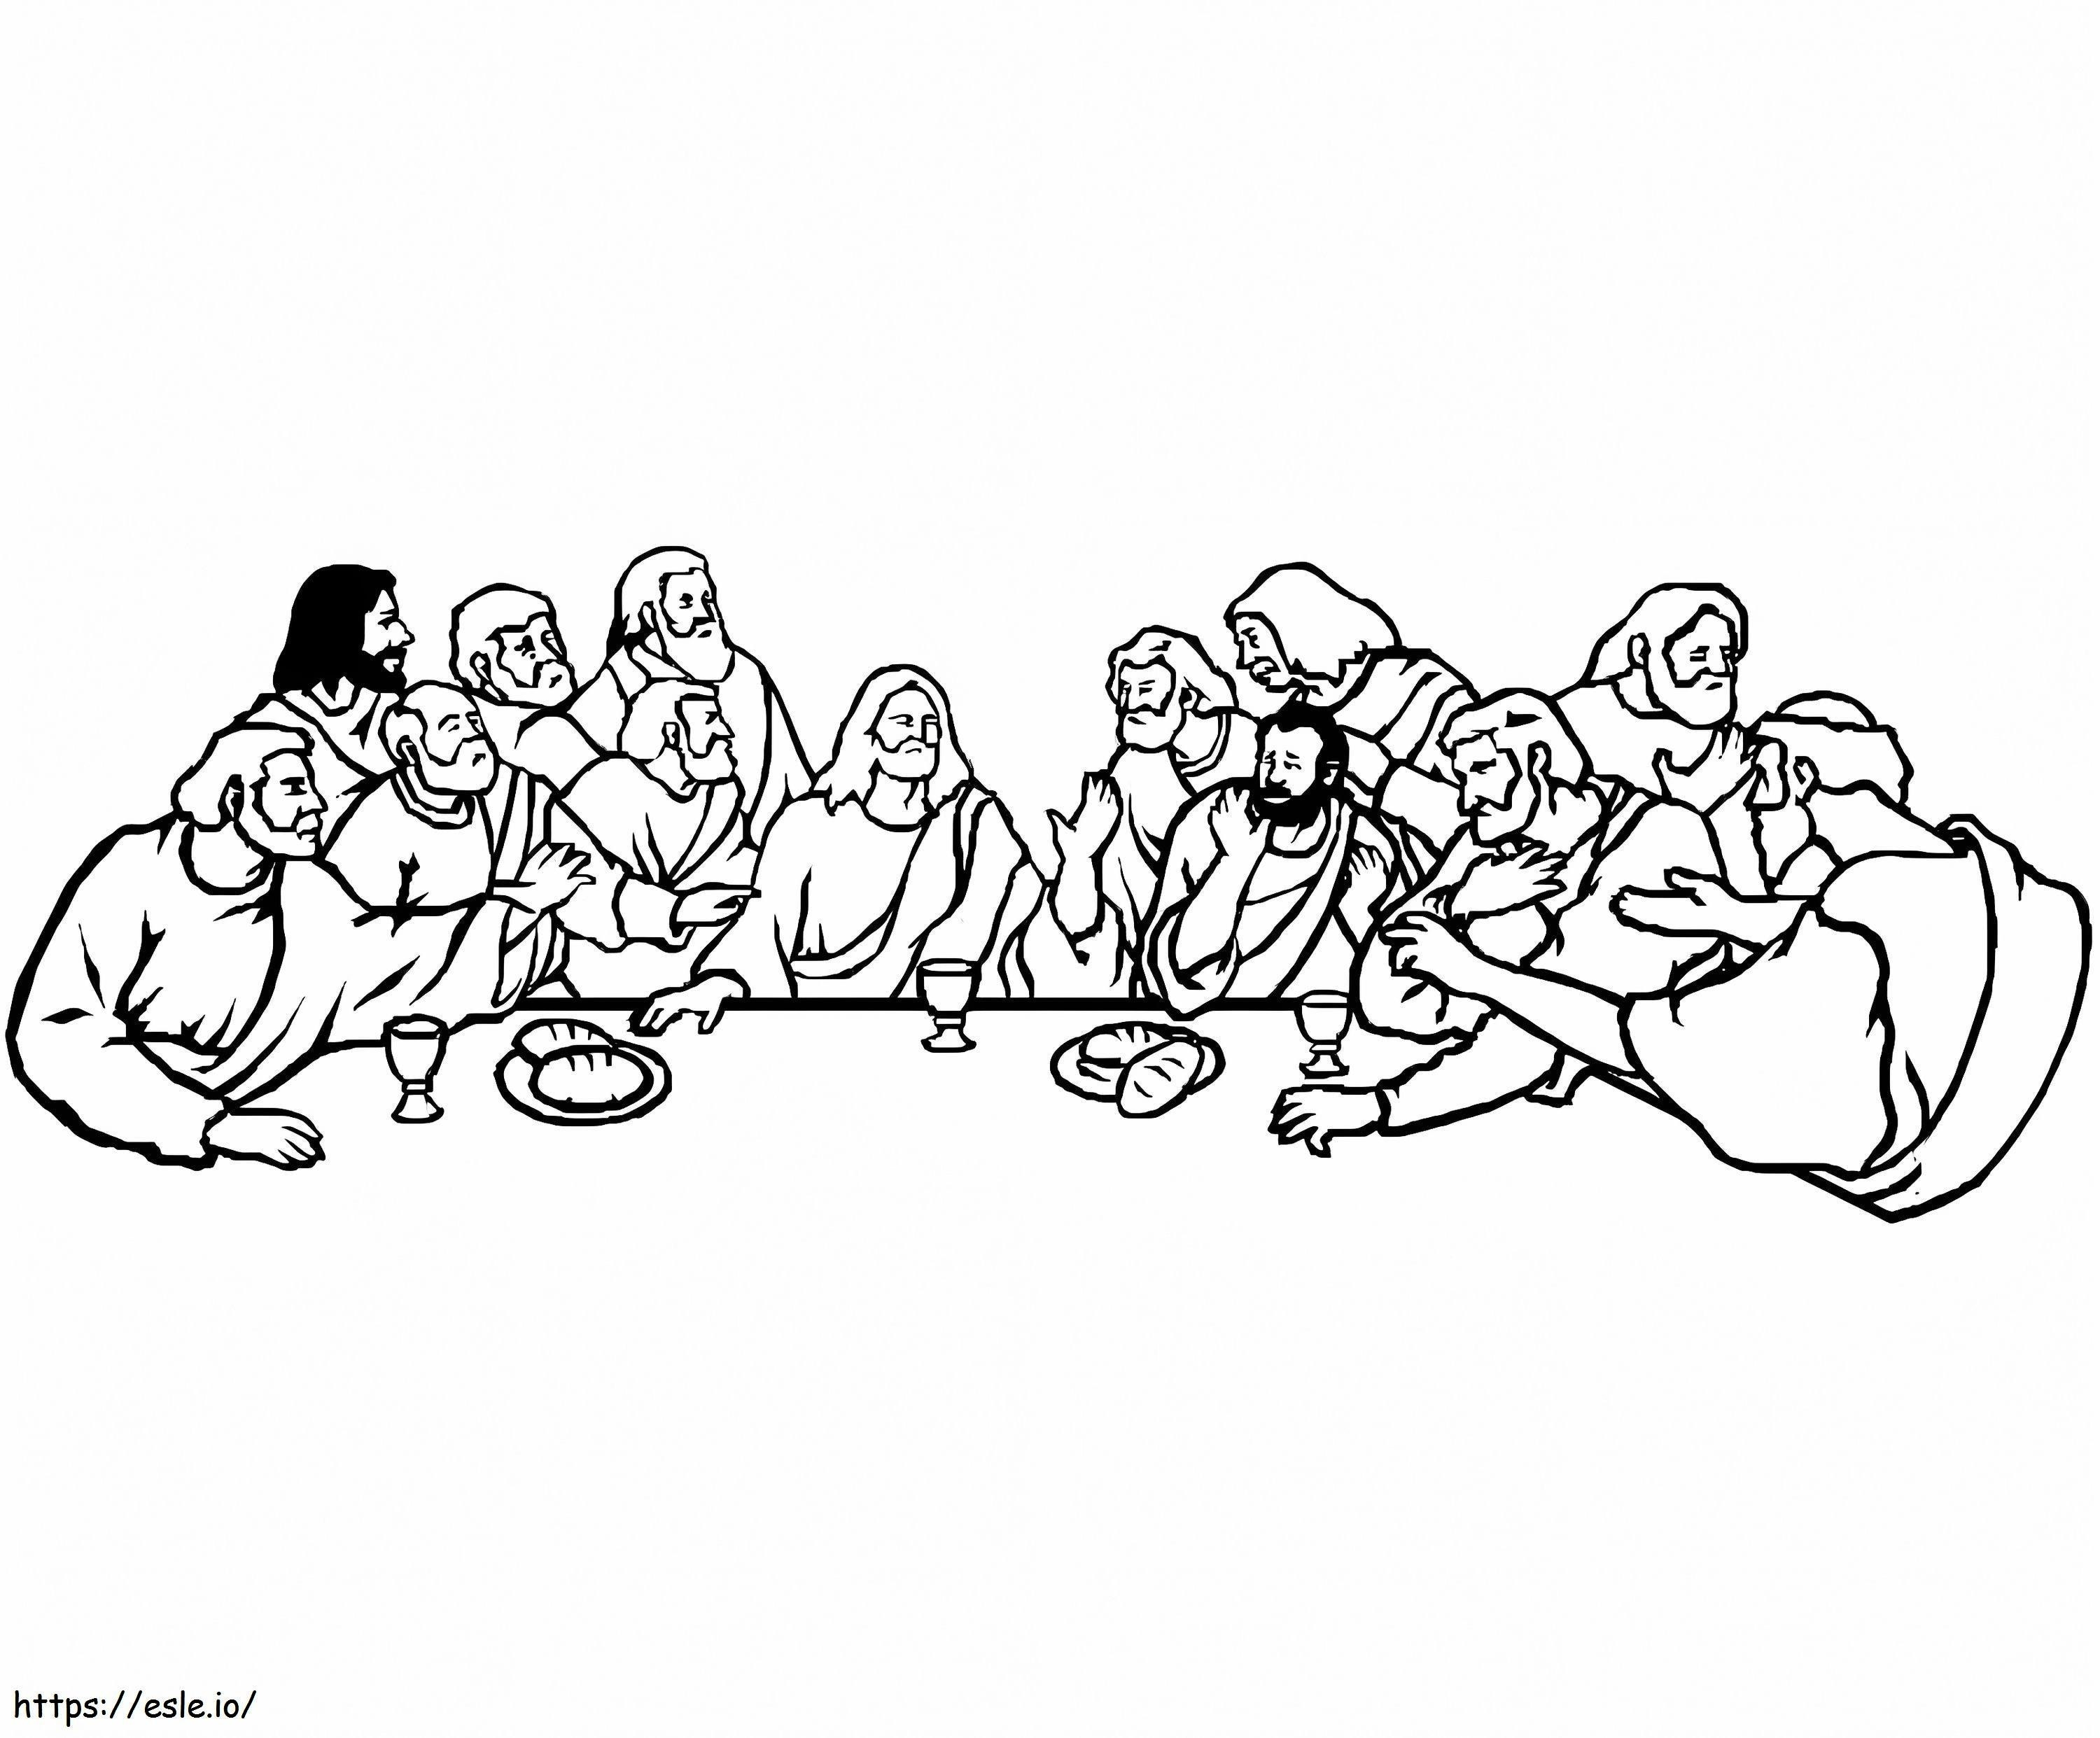 Last Supper 2 coloring page